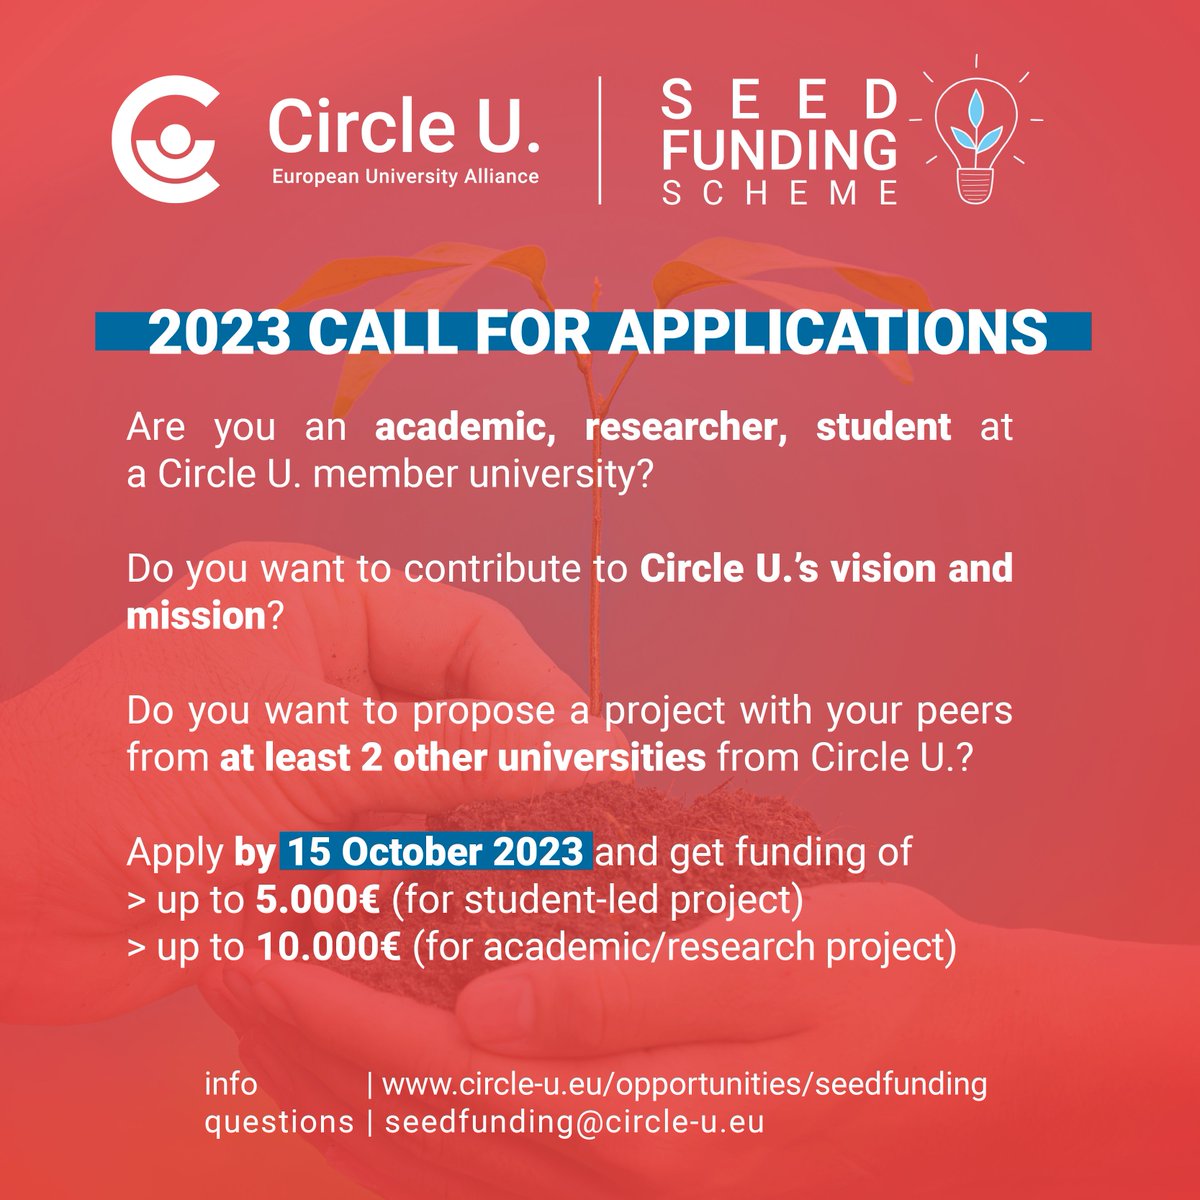 Circle U. Seed Funding Scheme: the 2023 call is open Apply by 15 October 2023: unipi.it/index.php/engl… @CircleU_eu